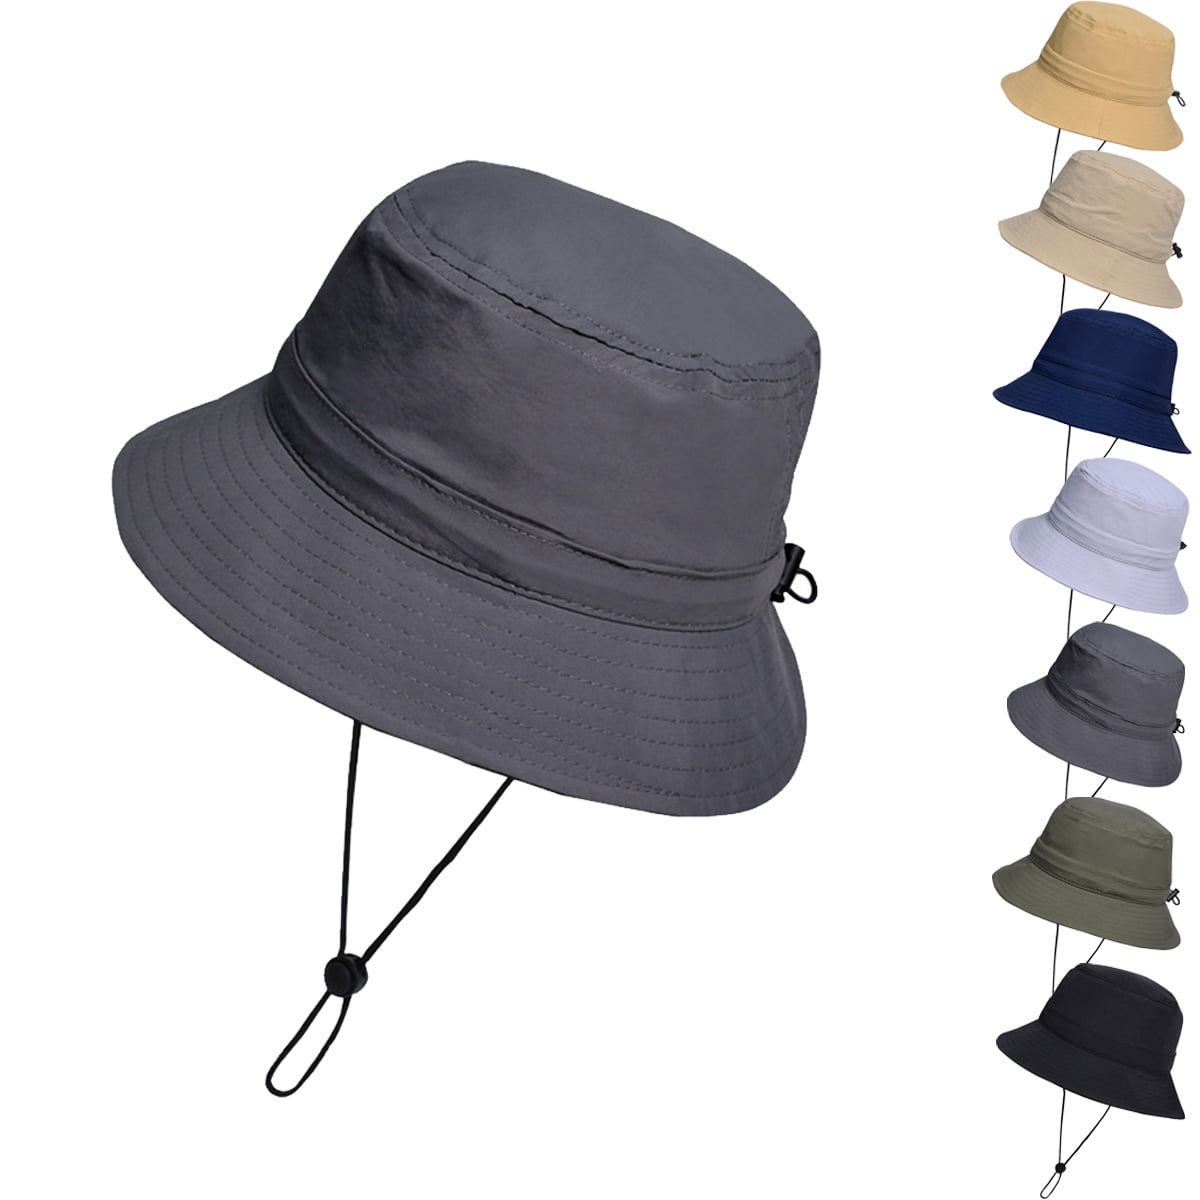 Ponytail Sun Bucket Hats for Women UV Protection Foldable Wide